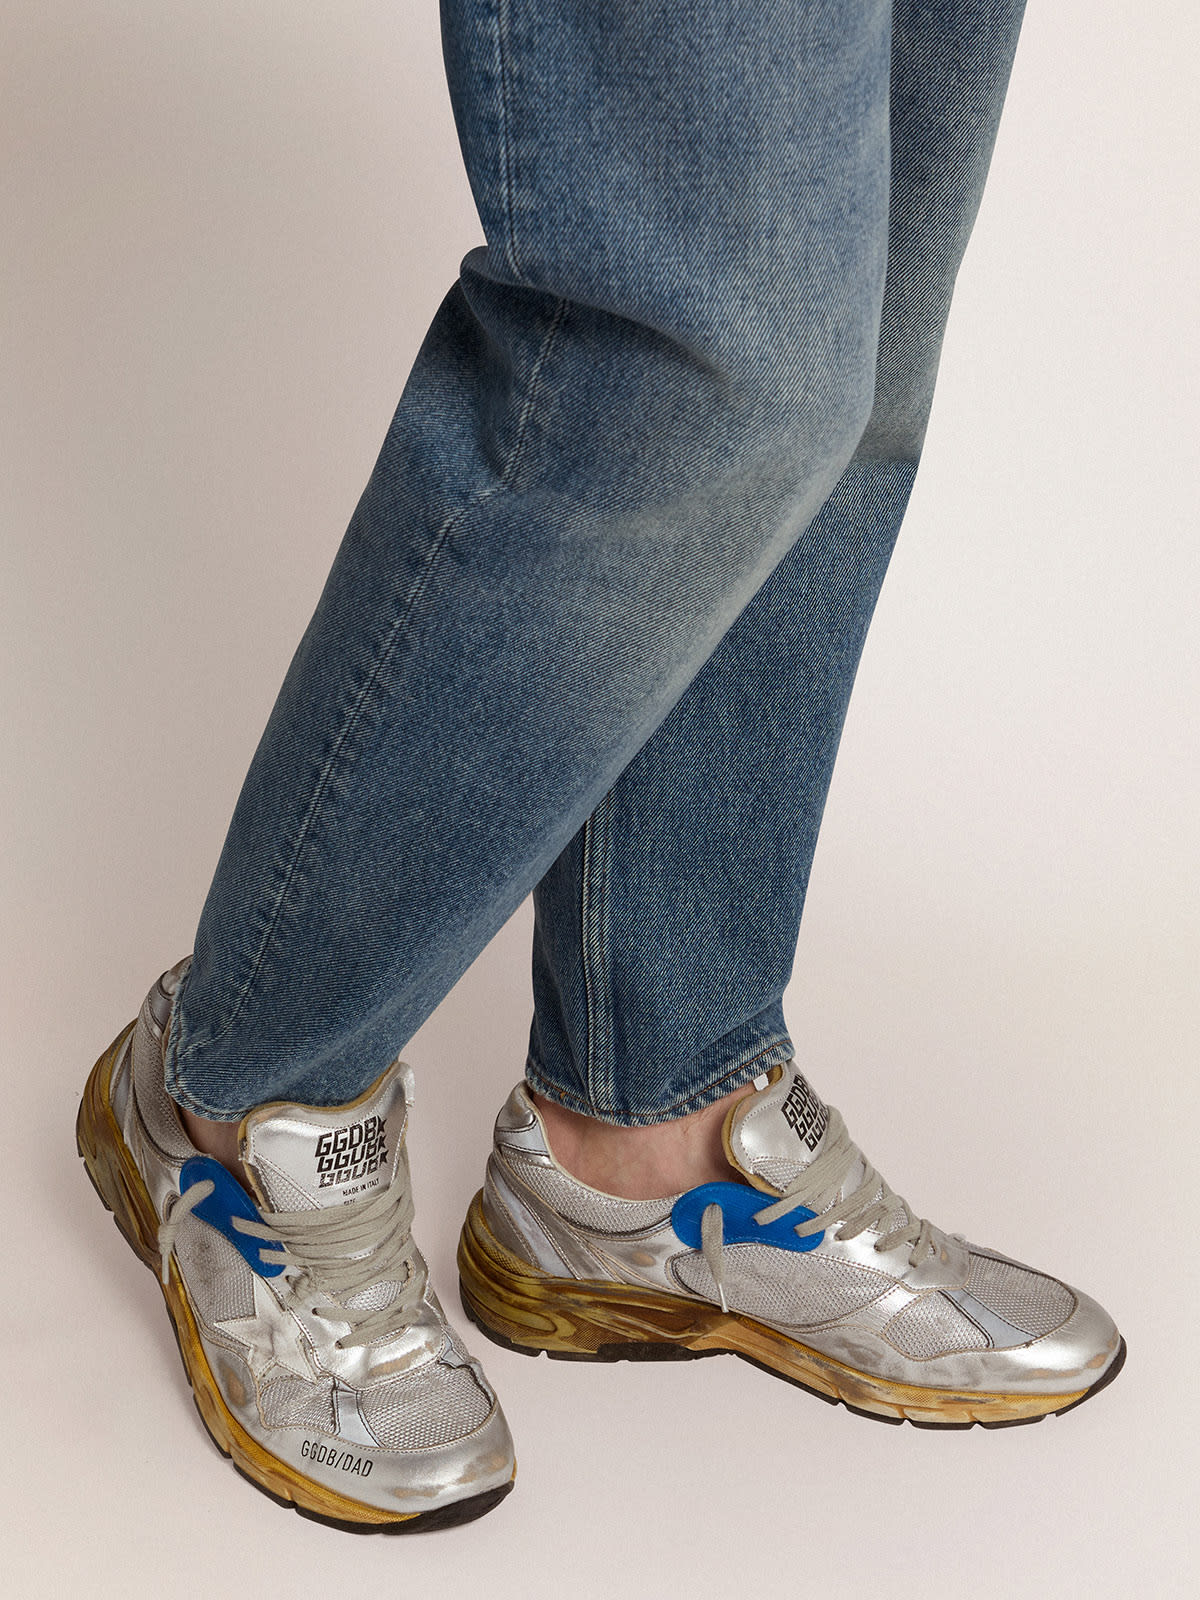 Golden Goose - Sneaker Dad-Star color argento e finiture distressed in 